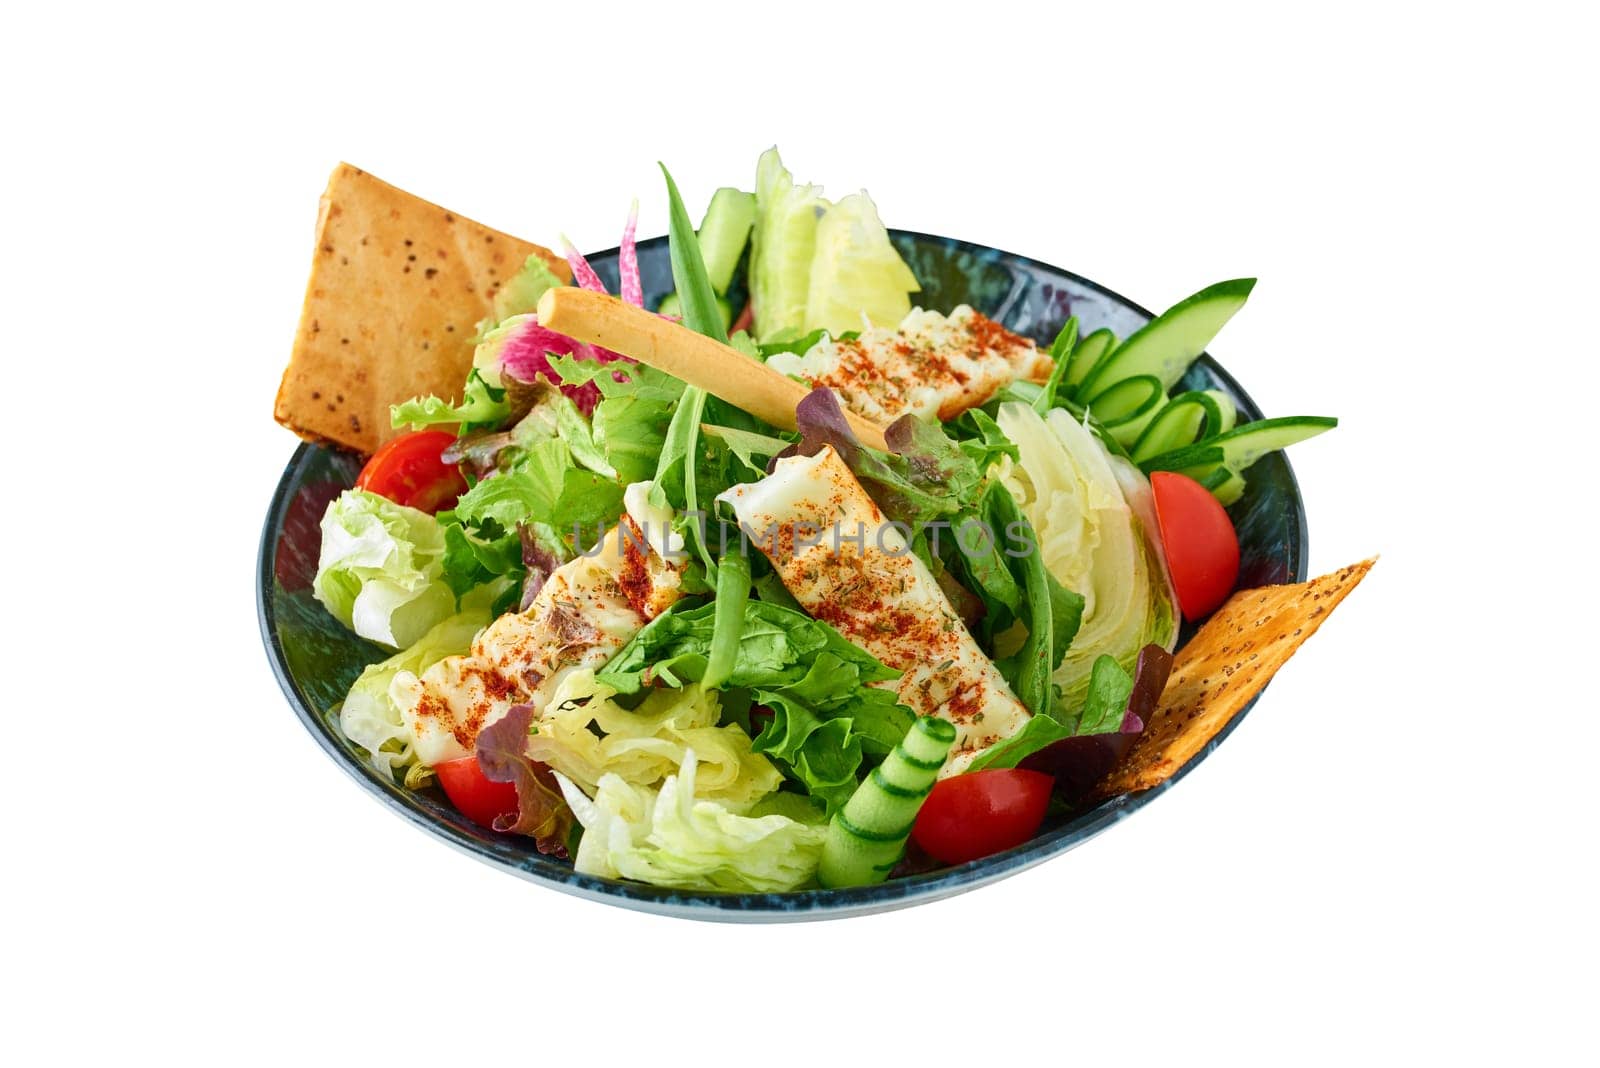 Salad with grilled hellim or halloumi cheese by Sonat